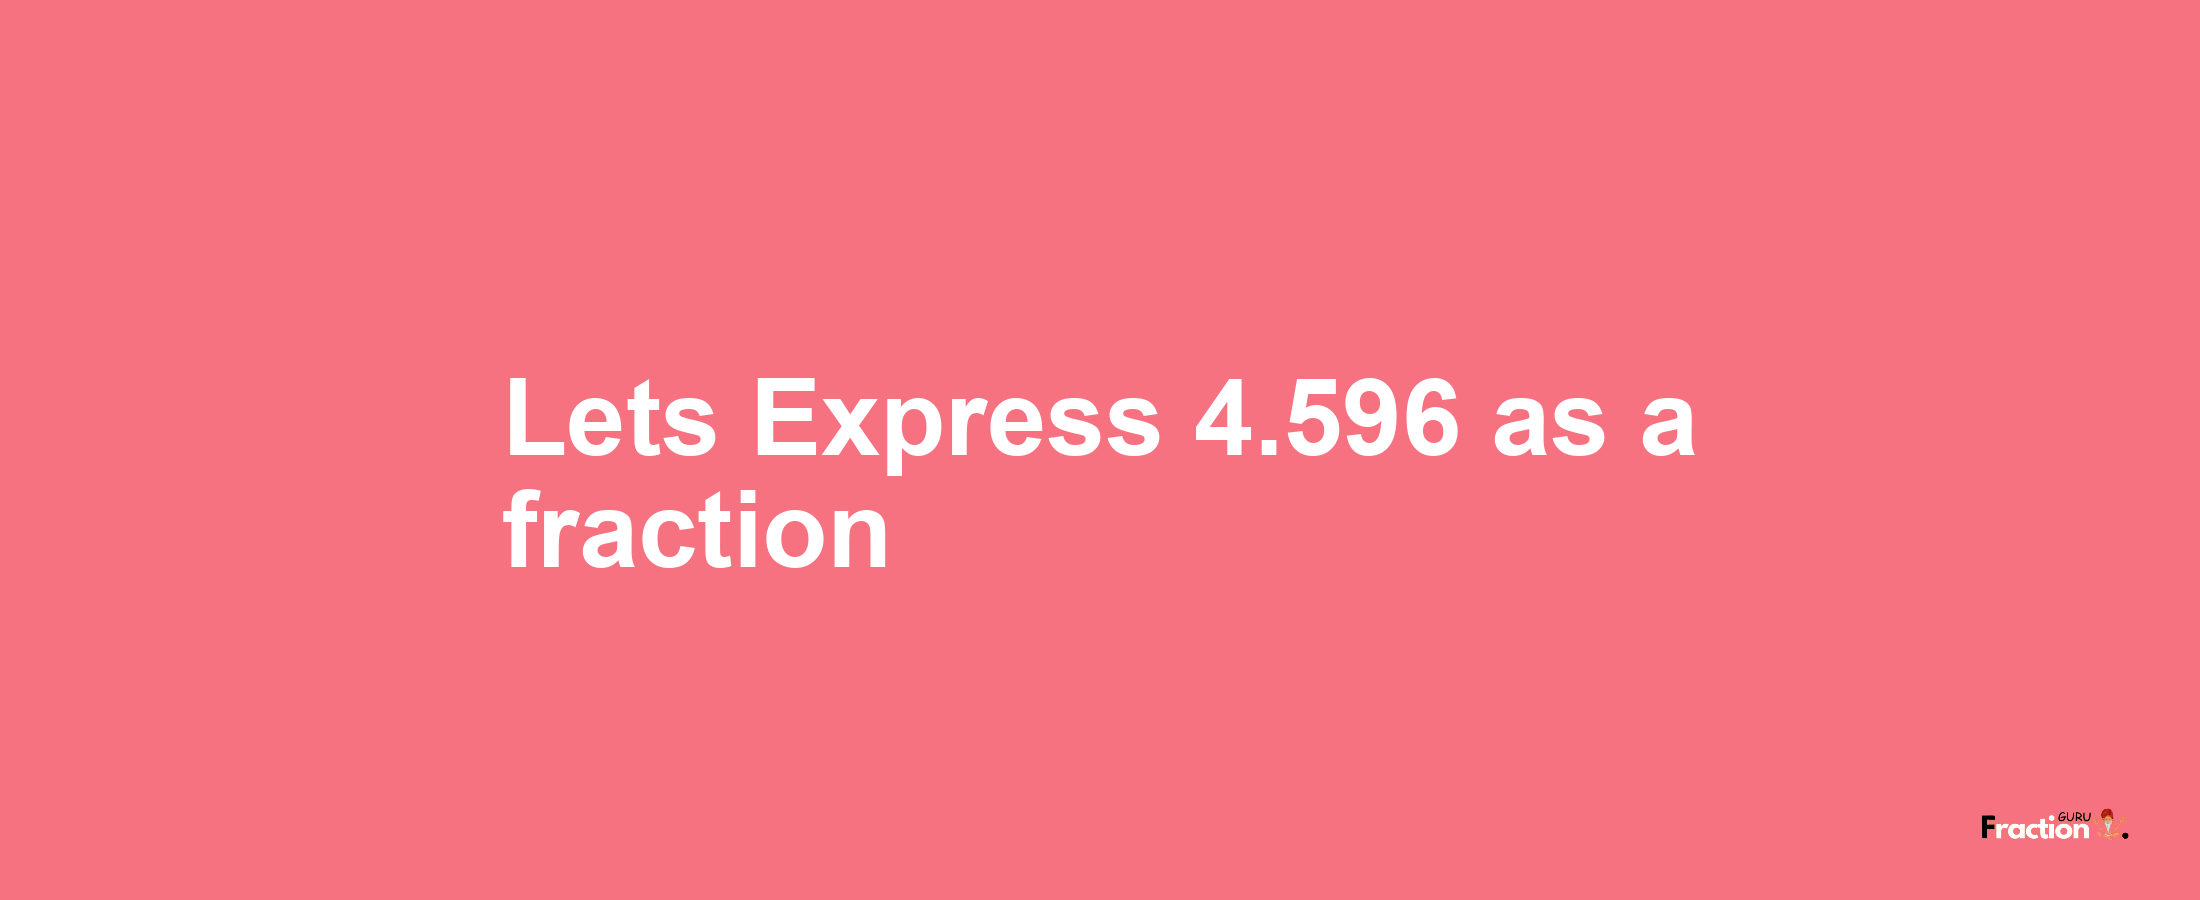 Lets Express 4.596 as afraction